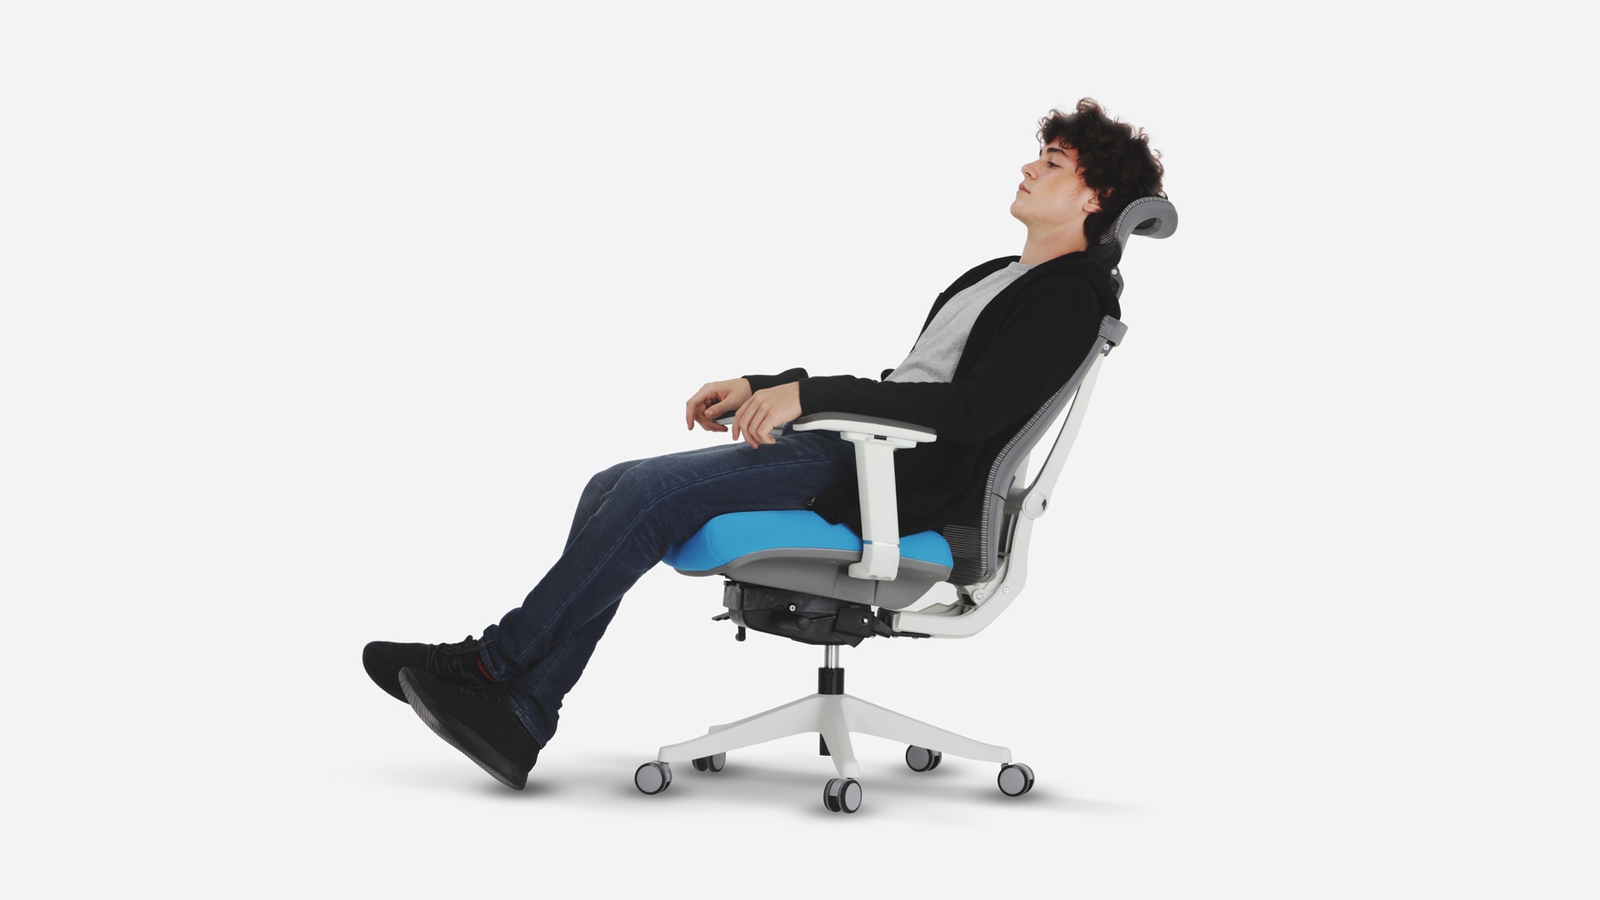 Ergonomic Features That Make Sleeping in an Office Chair Possible and Comfortable